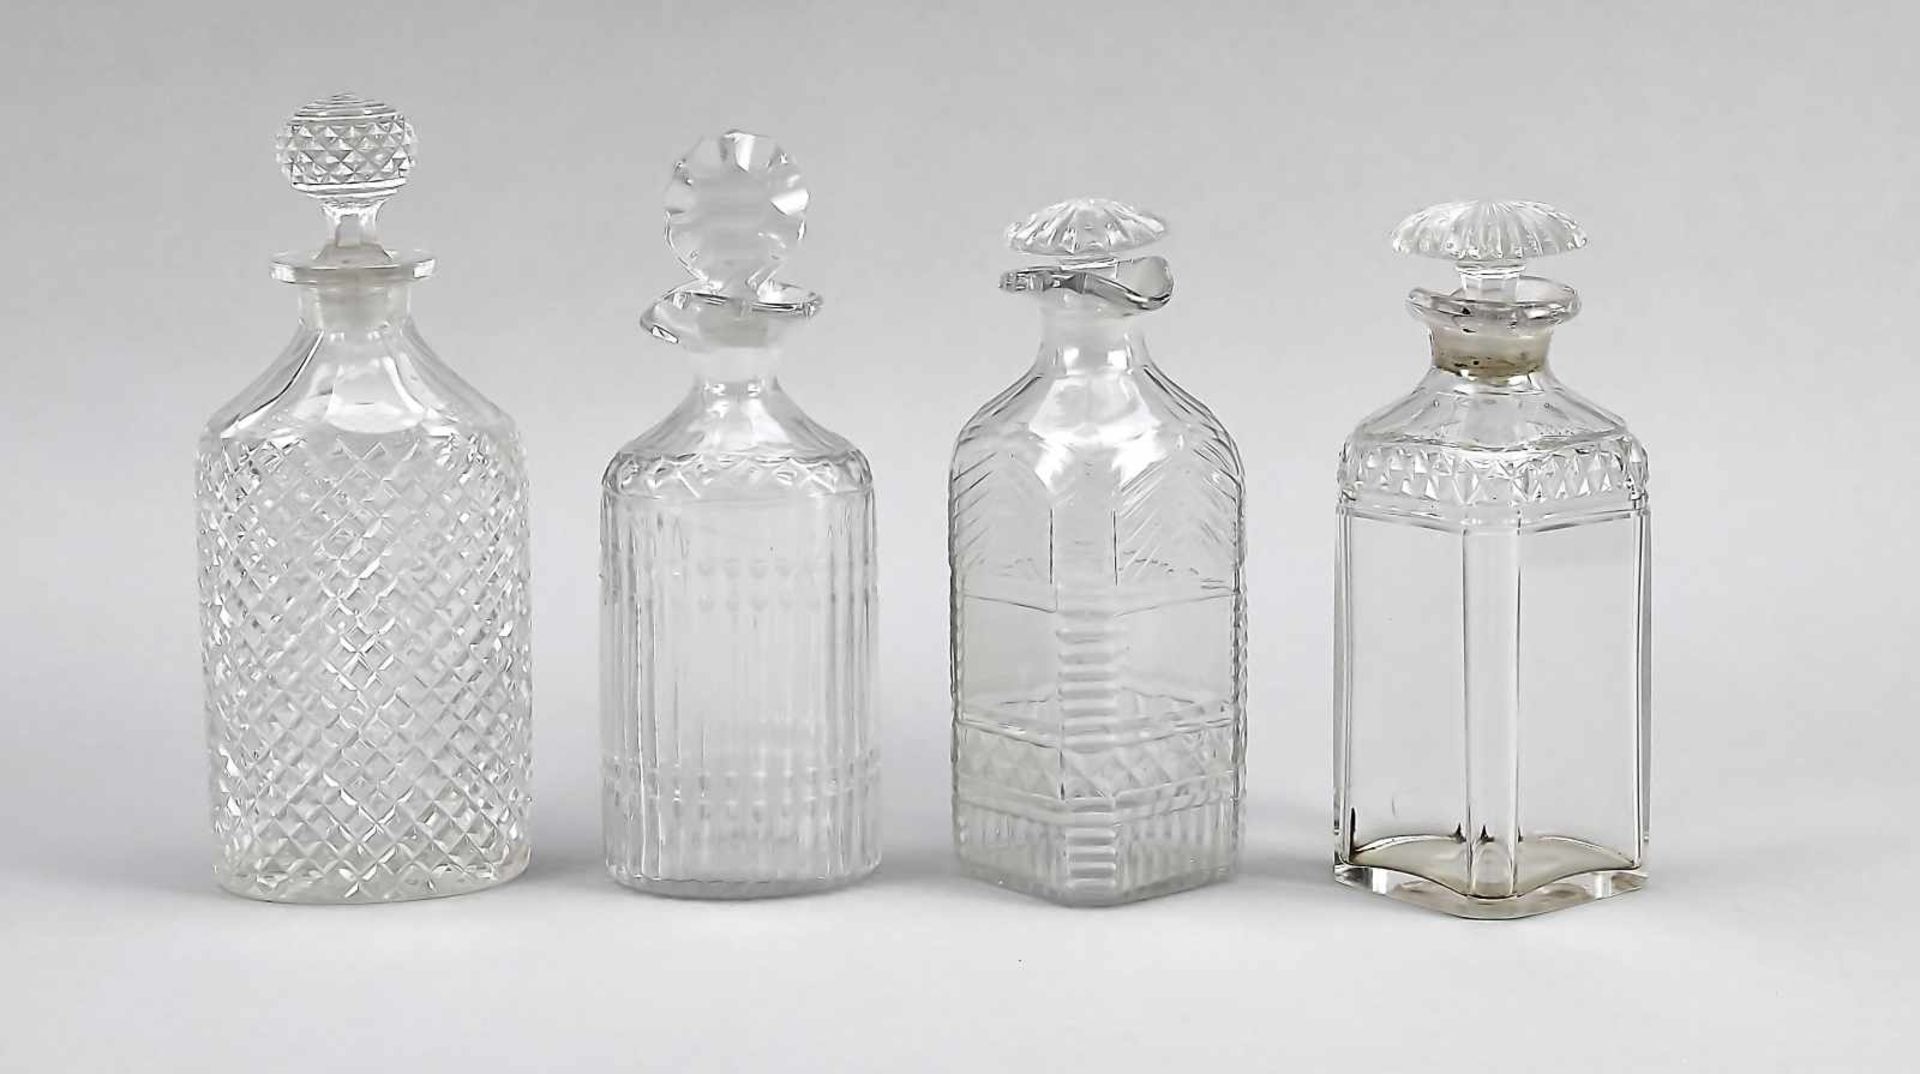 Four flasks, 20th cent., different shapes and sizes, 2 oval, 2 quadrangular with flattened